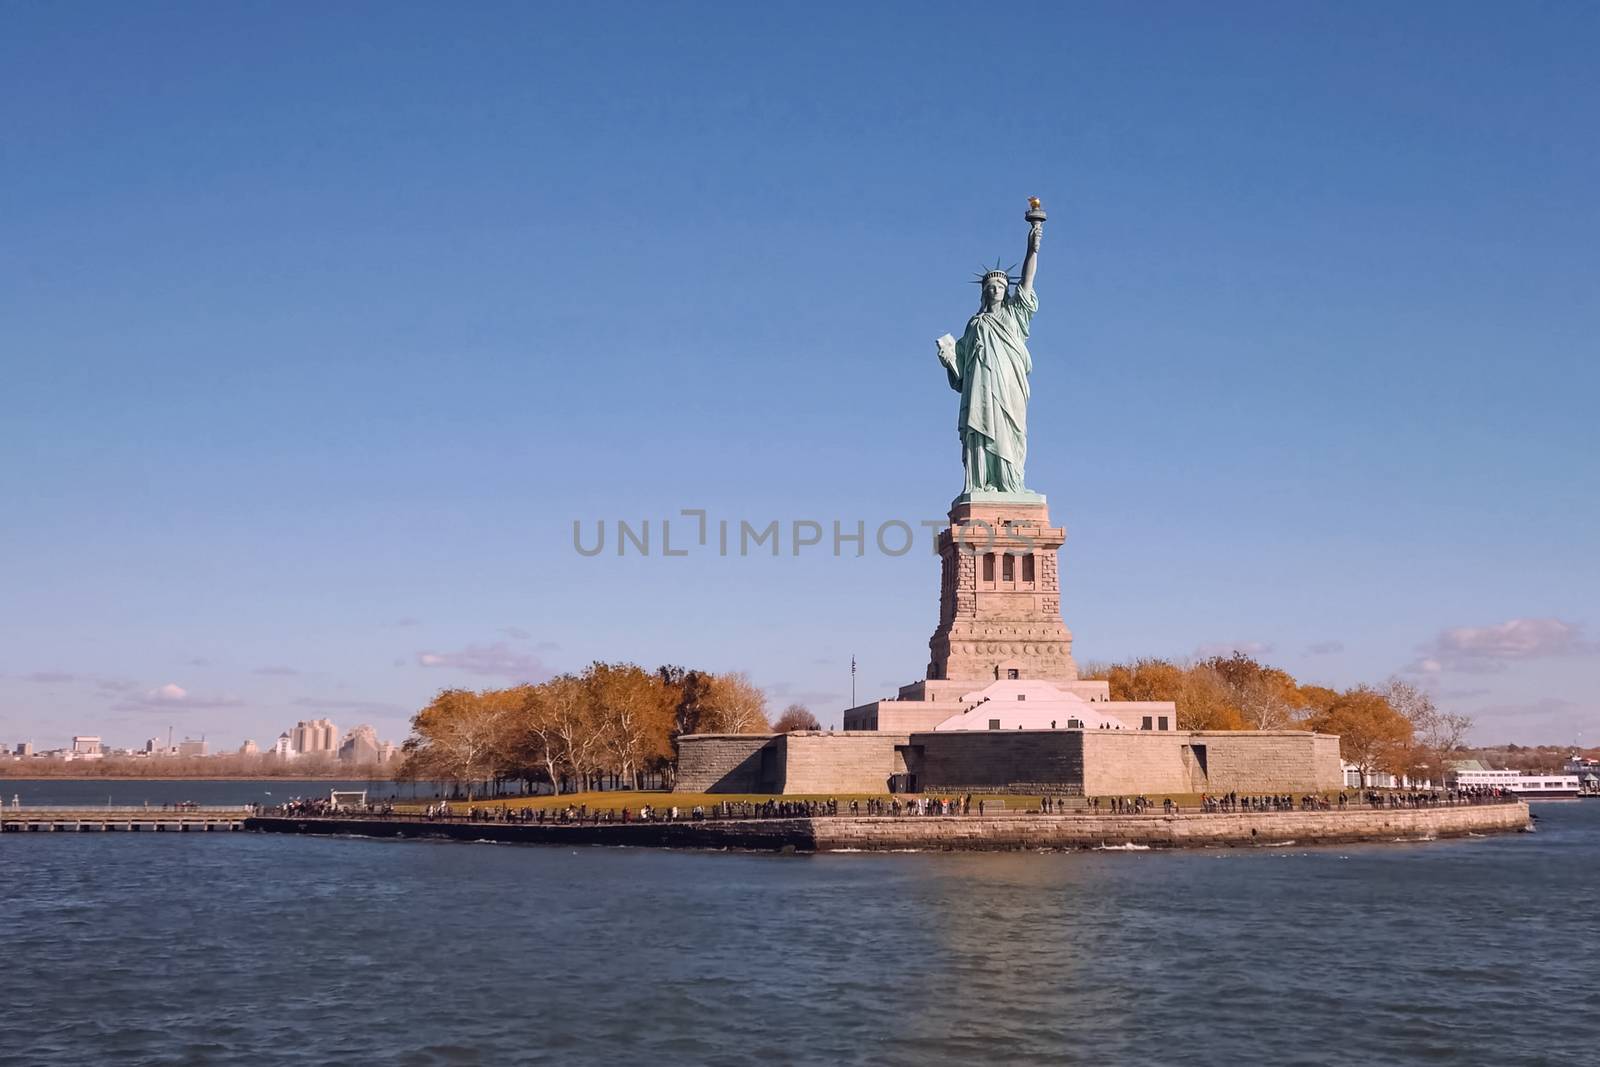 New York, USA - October 15, 2017: Statue of Liberty is the symbol of America. Free people. The symbol of freedom.